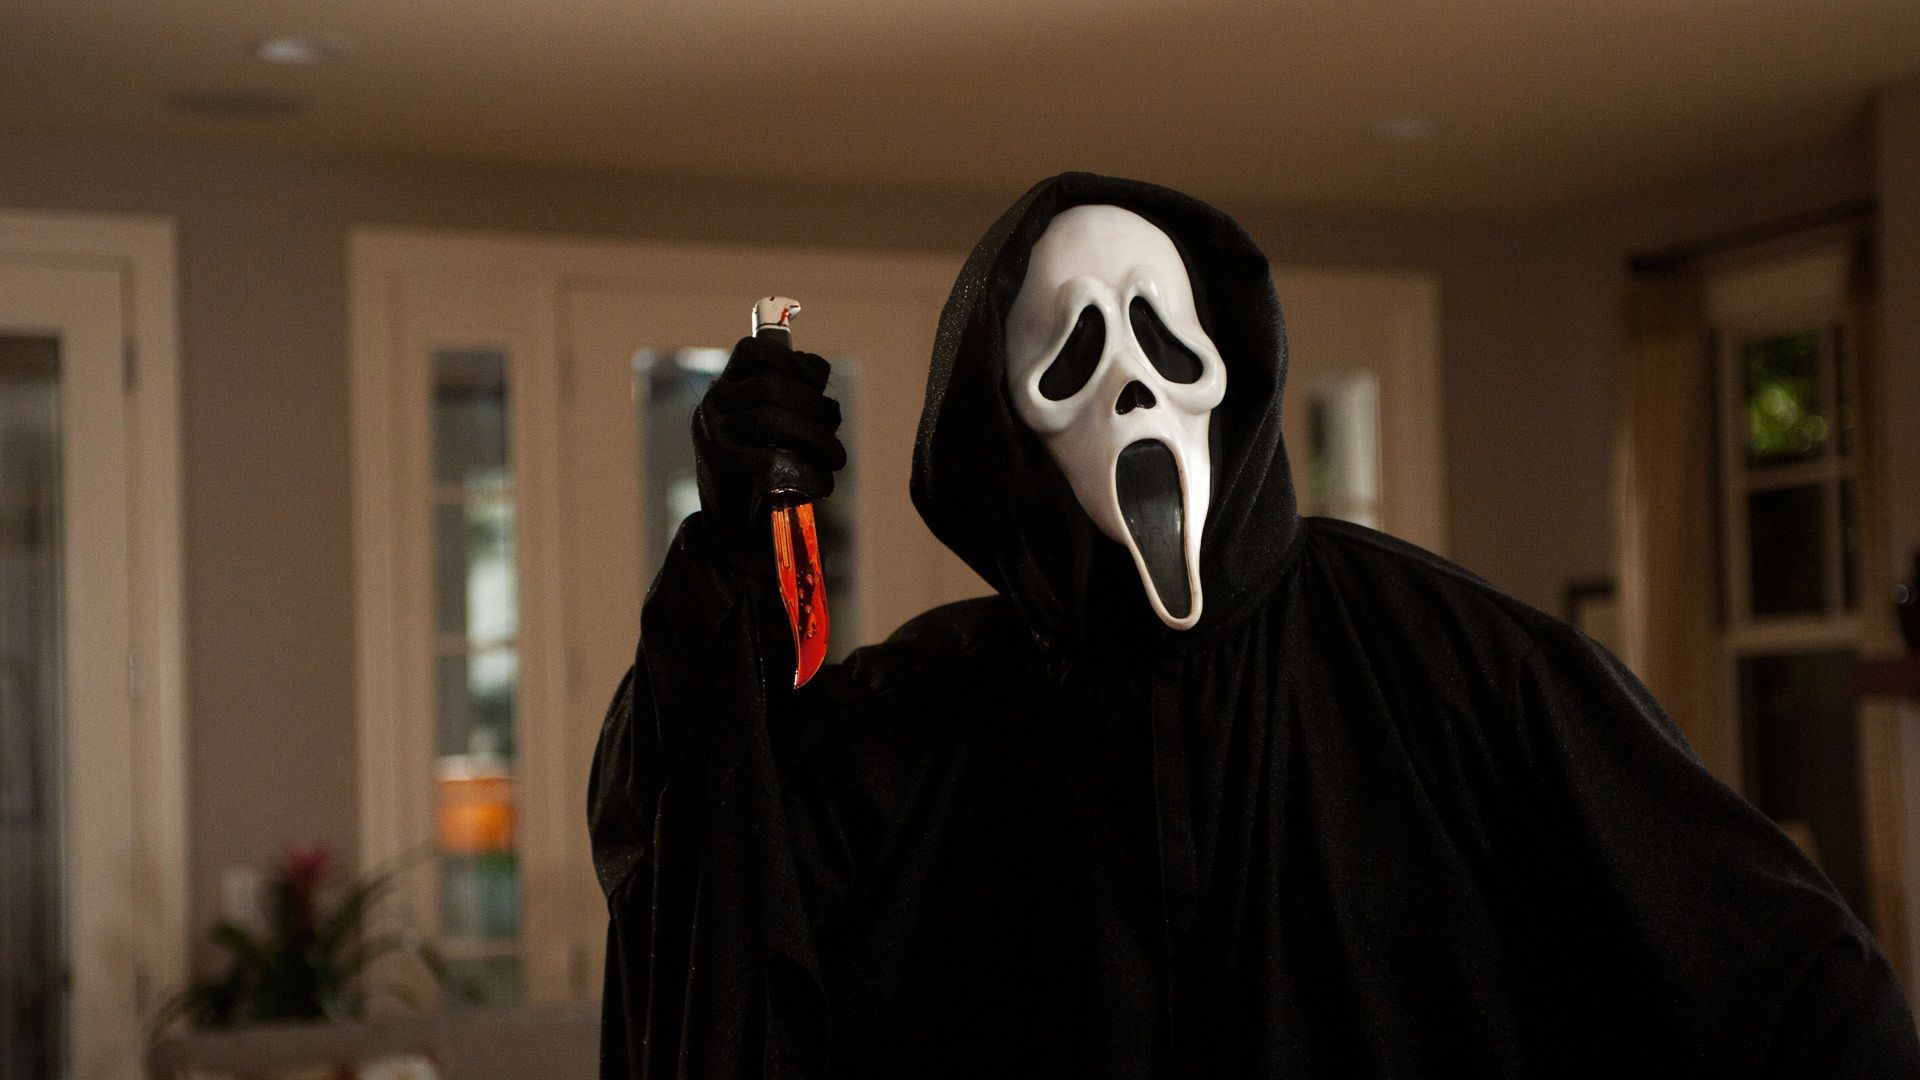 Ghostface and a Knife